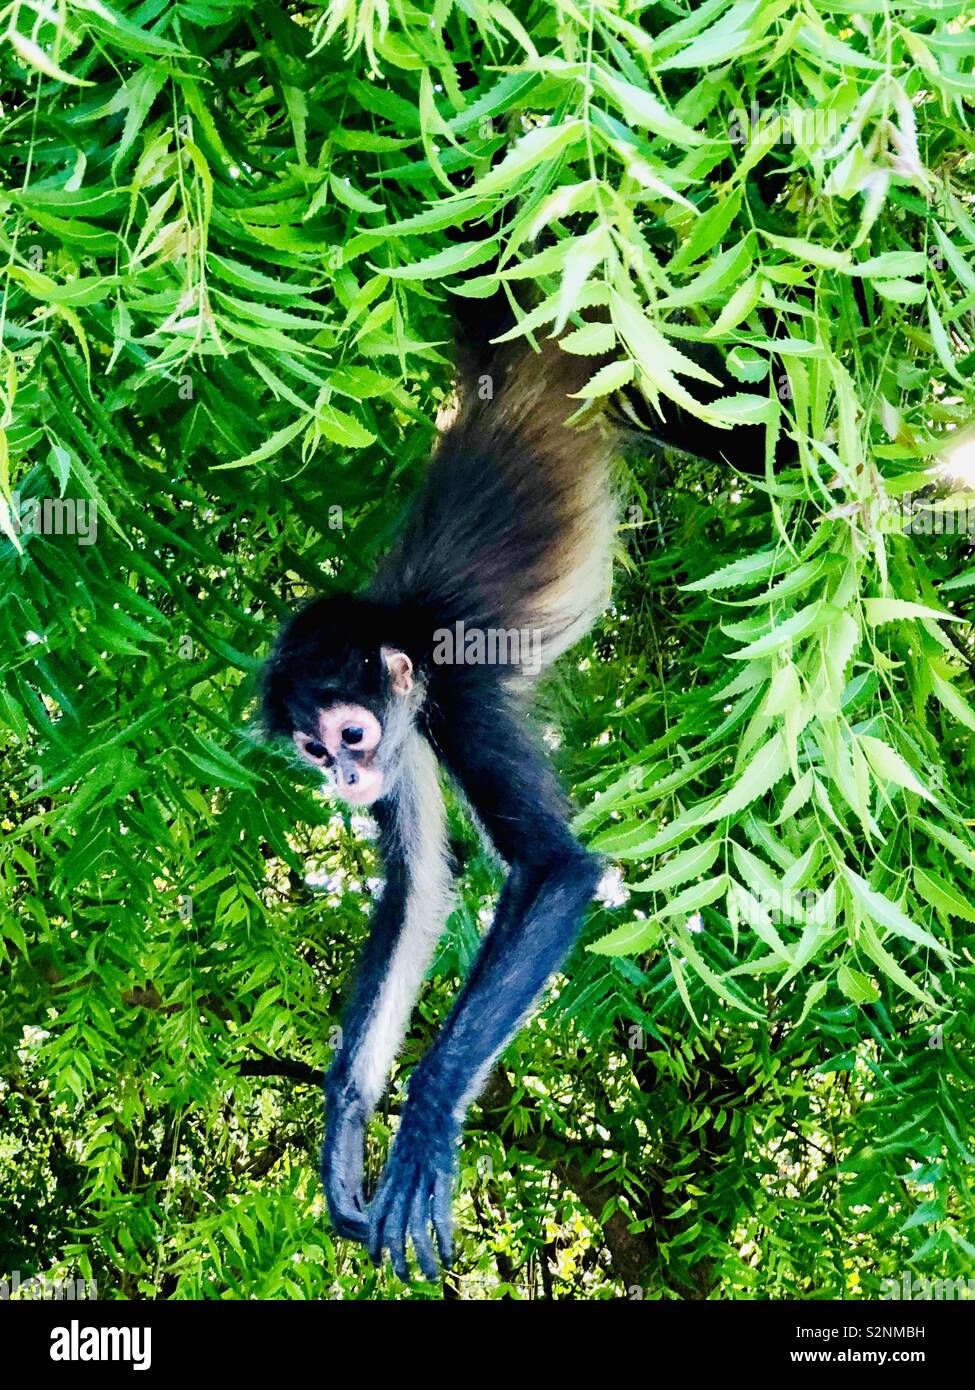 A Mexican Black Howler Monkey swinging from the trees of the Sandos Caracol Eco Resort in Playa del Carmen, Mexico. Stock Photo